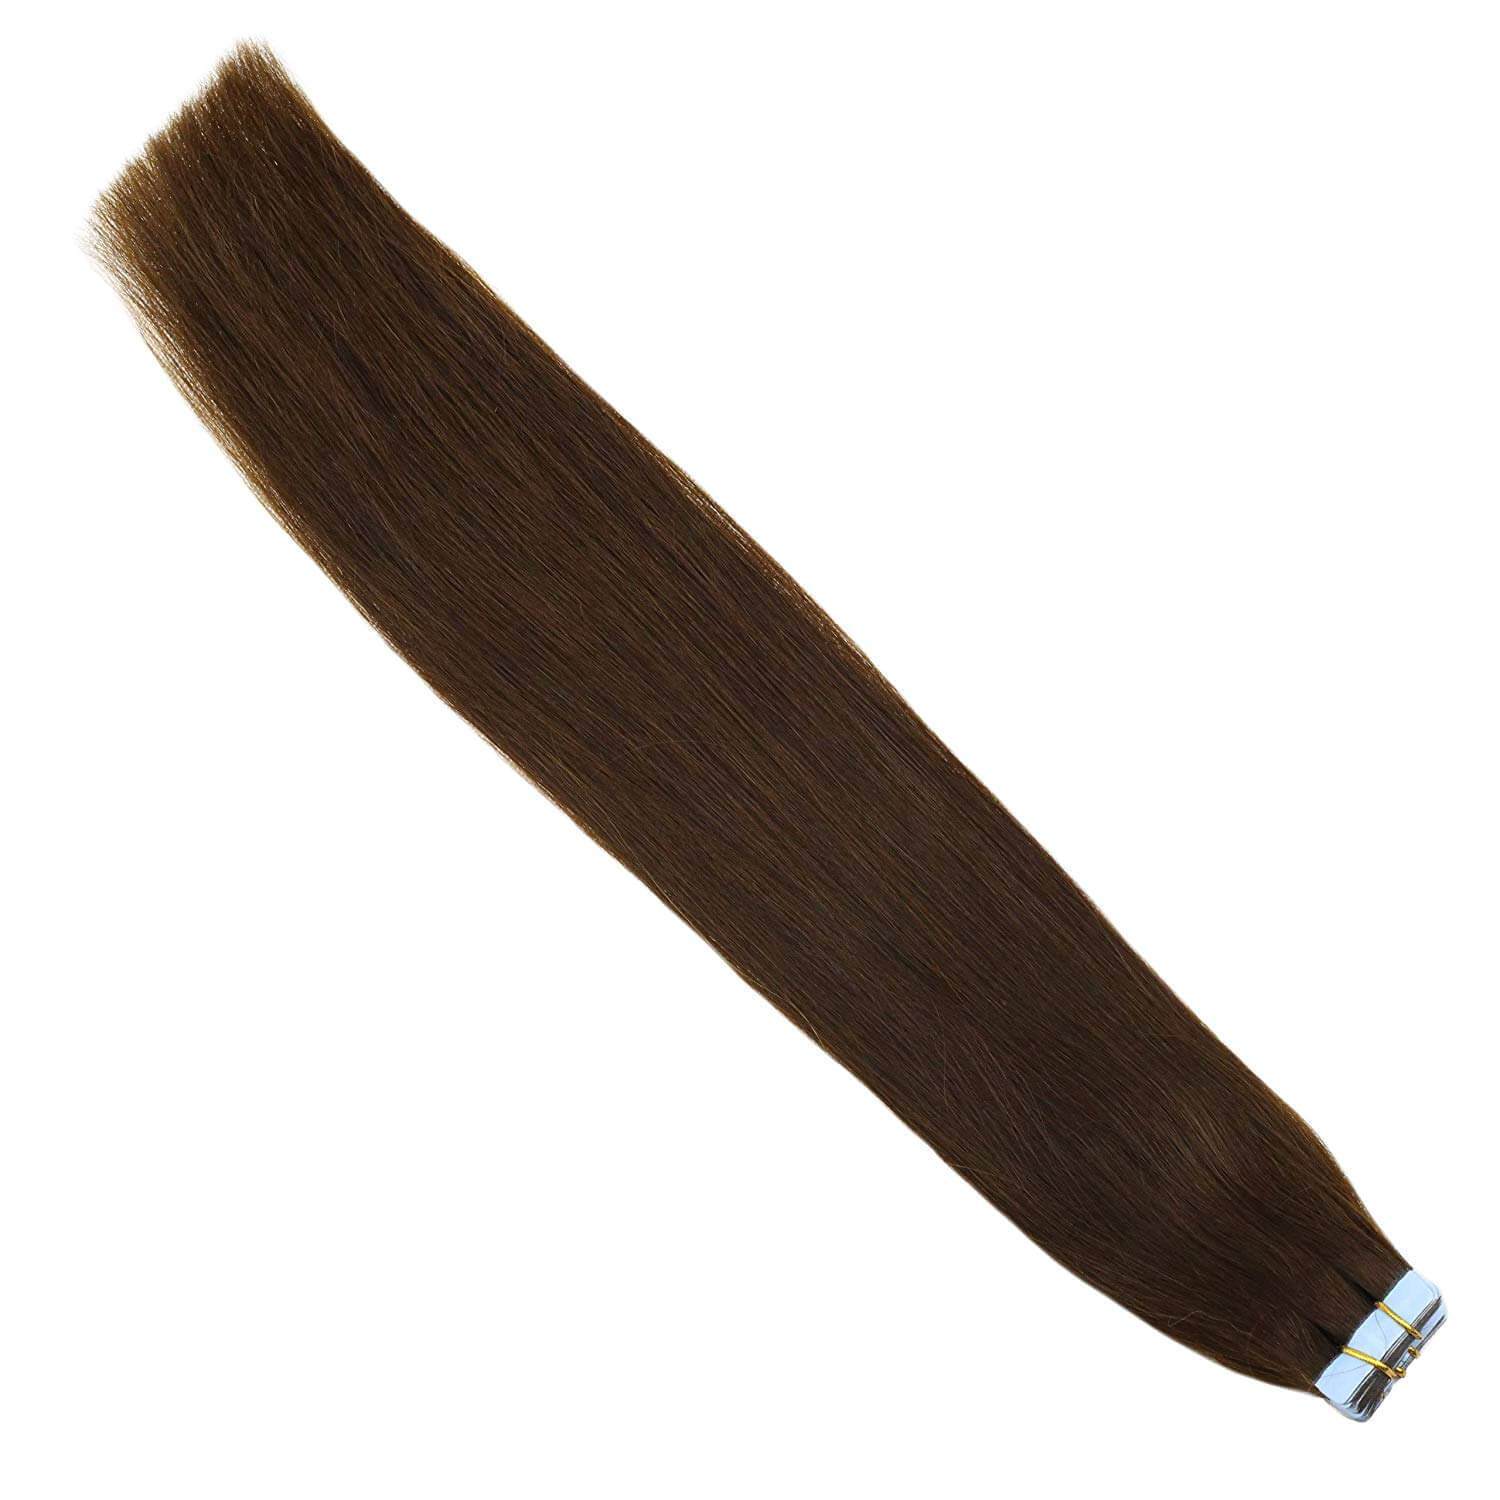 100% Human Hair Extensions Tape in 4 Brown